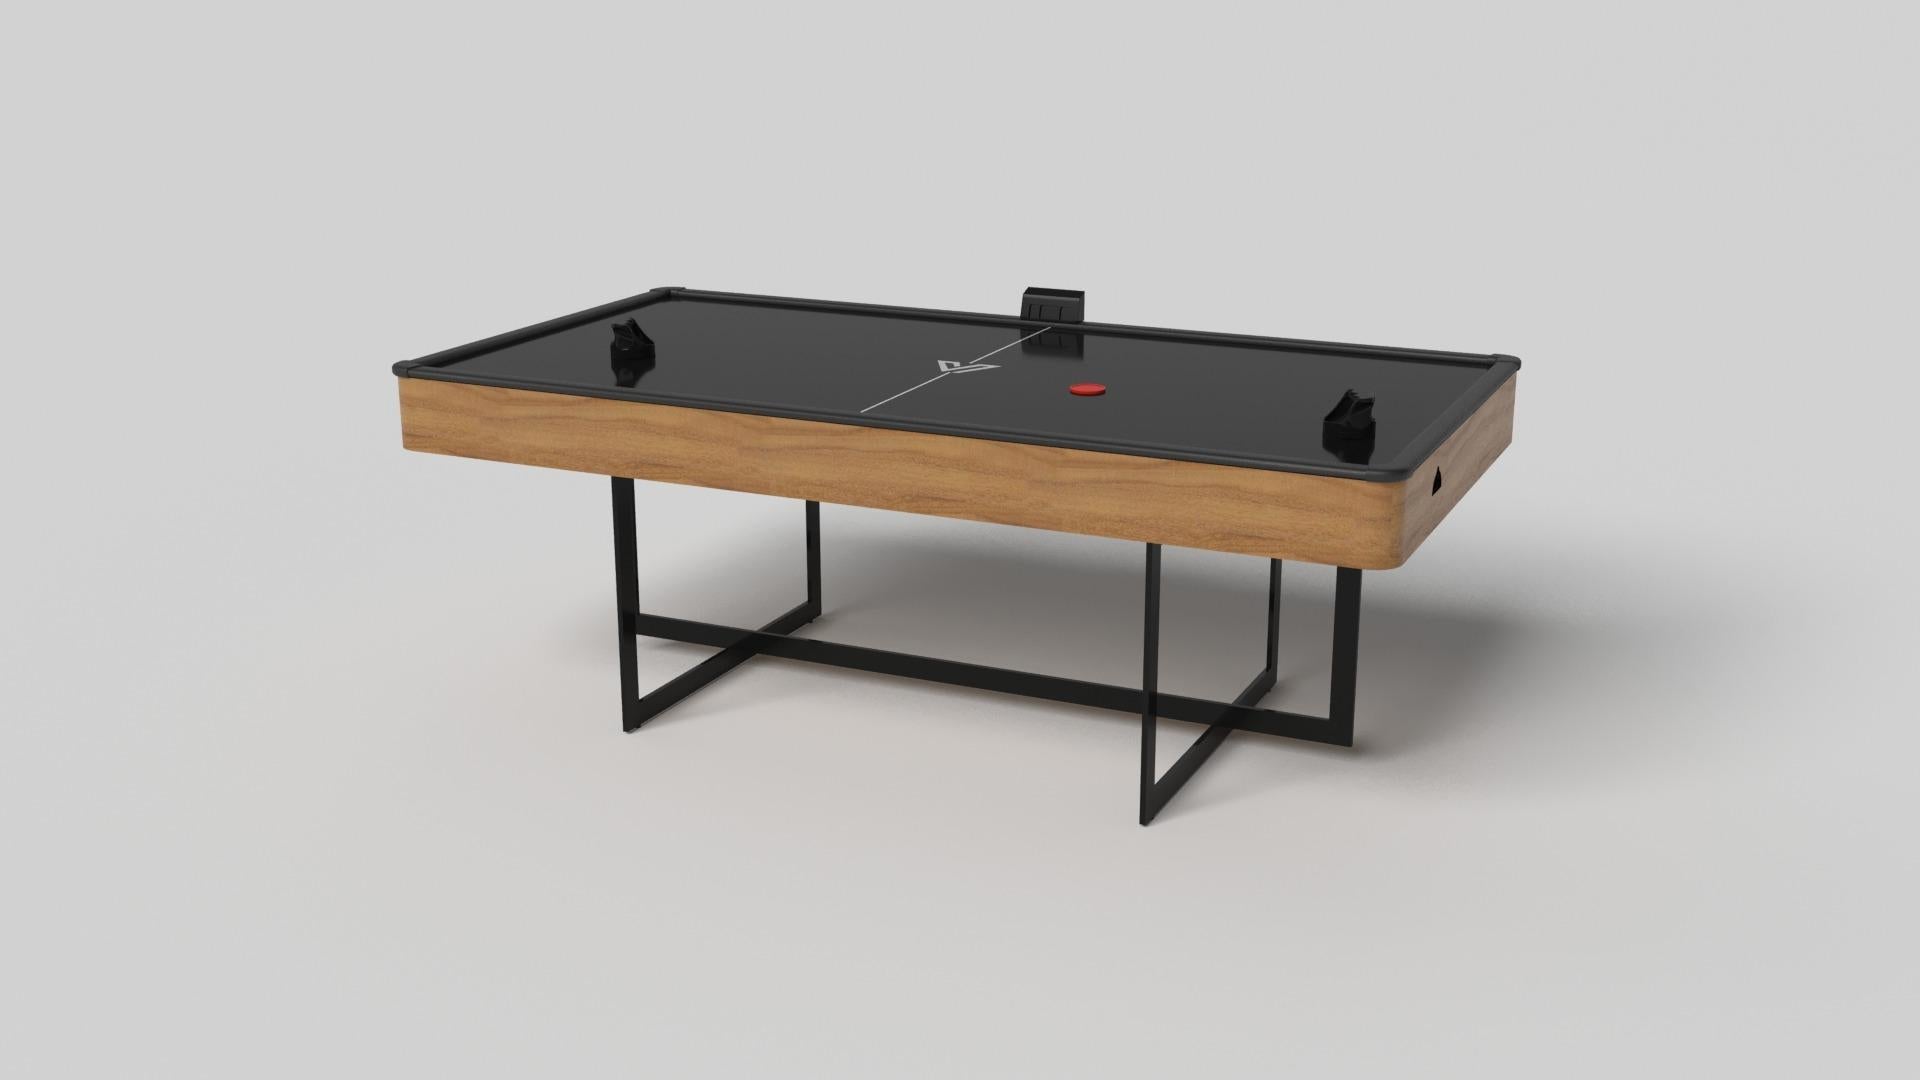 With an open metal foundation, our Beso table is a unique expression of contemporary forms and negative space. This air hockey table is handcrafted by our master artisans with a rectangle-in-rectangle base that echoes the angles and edges of a